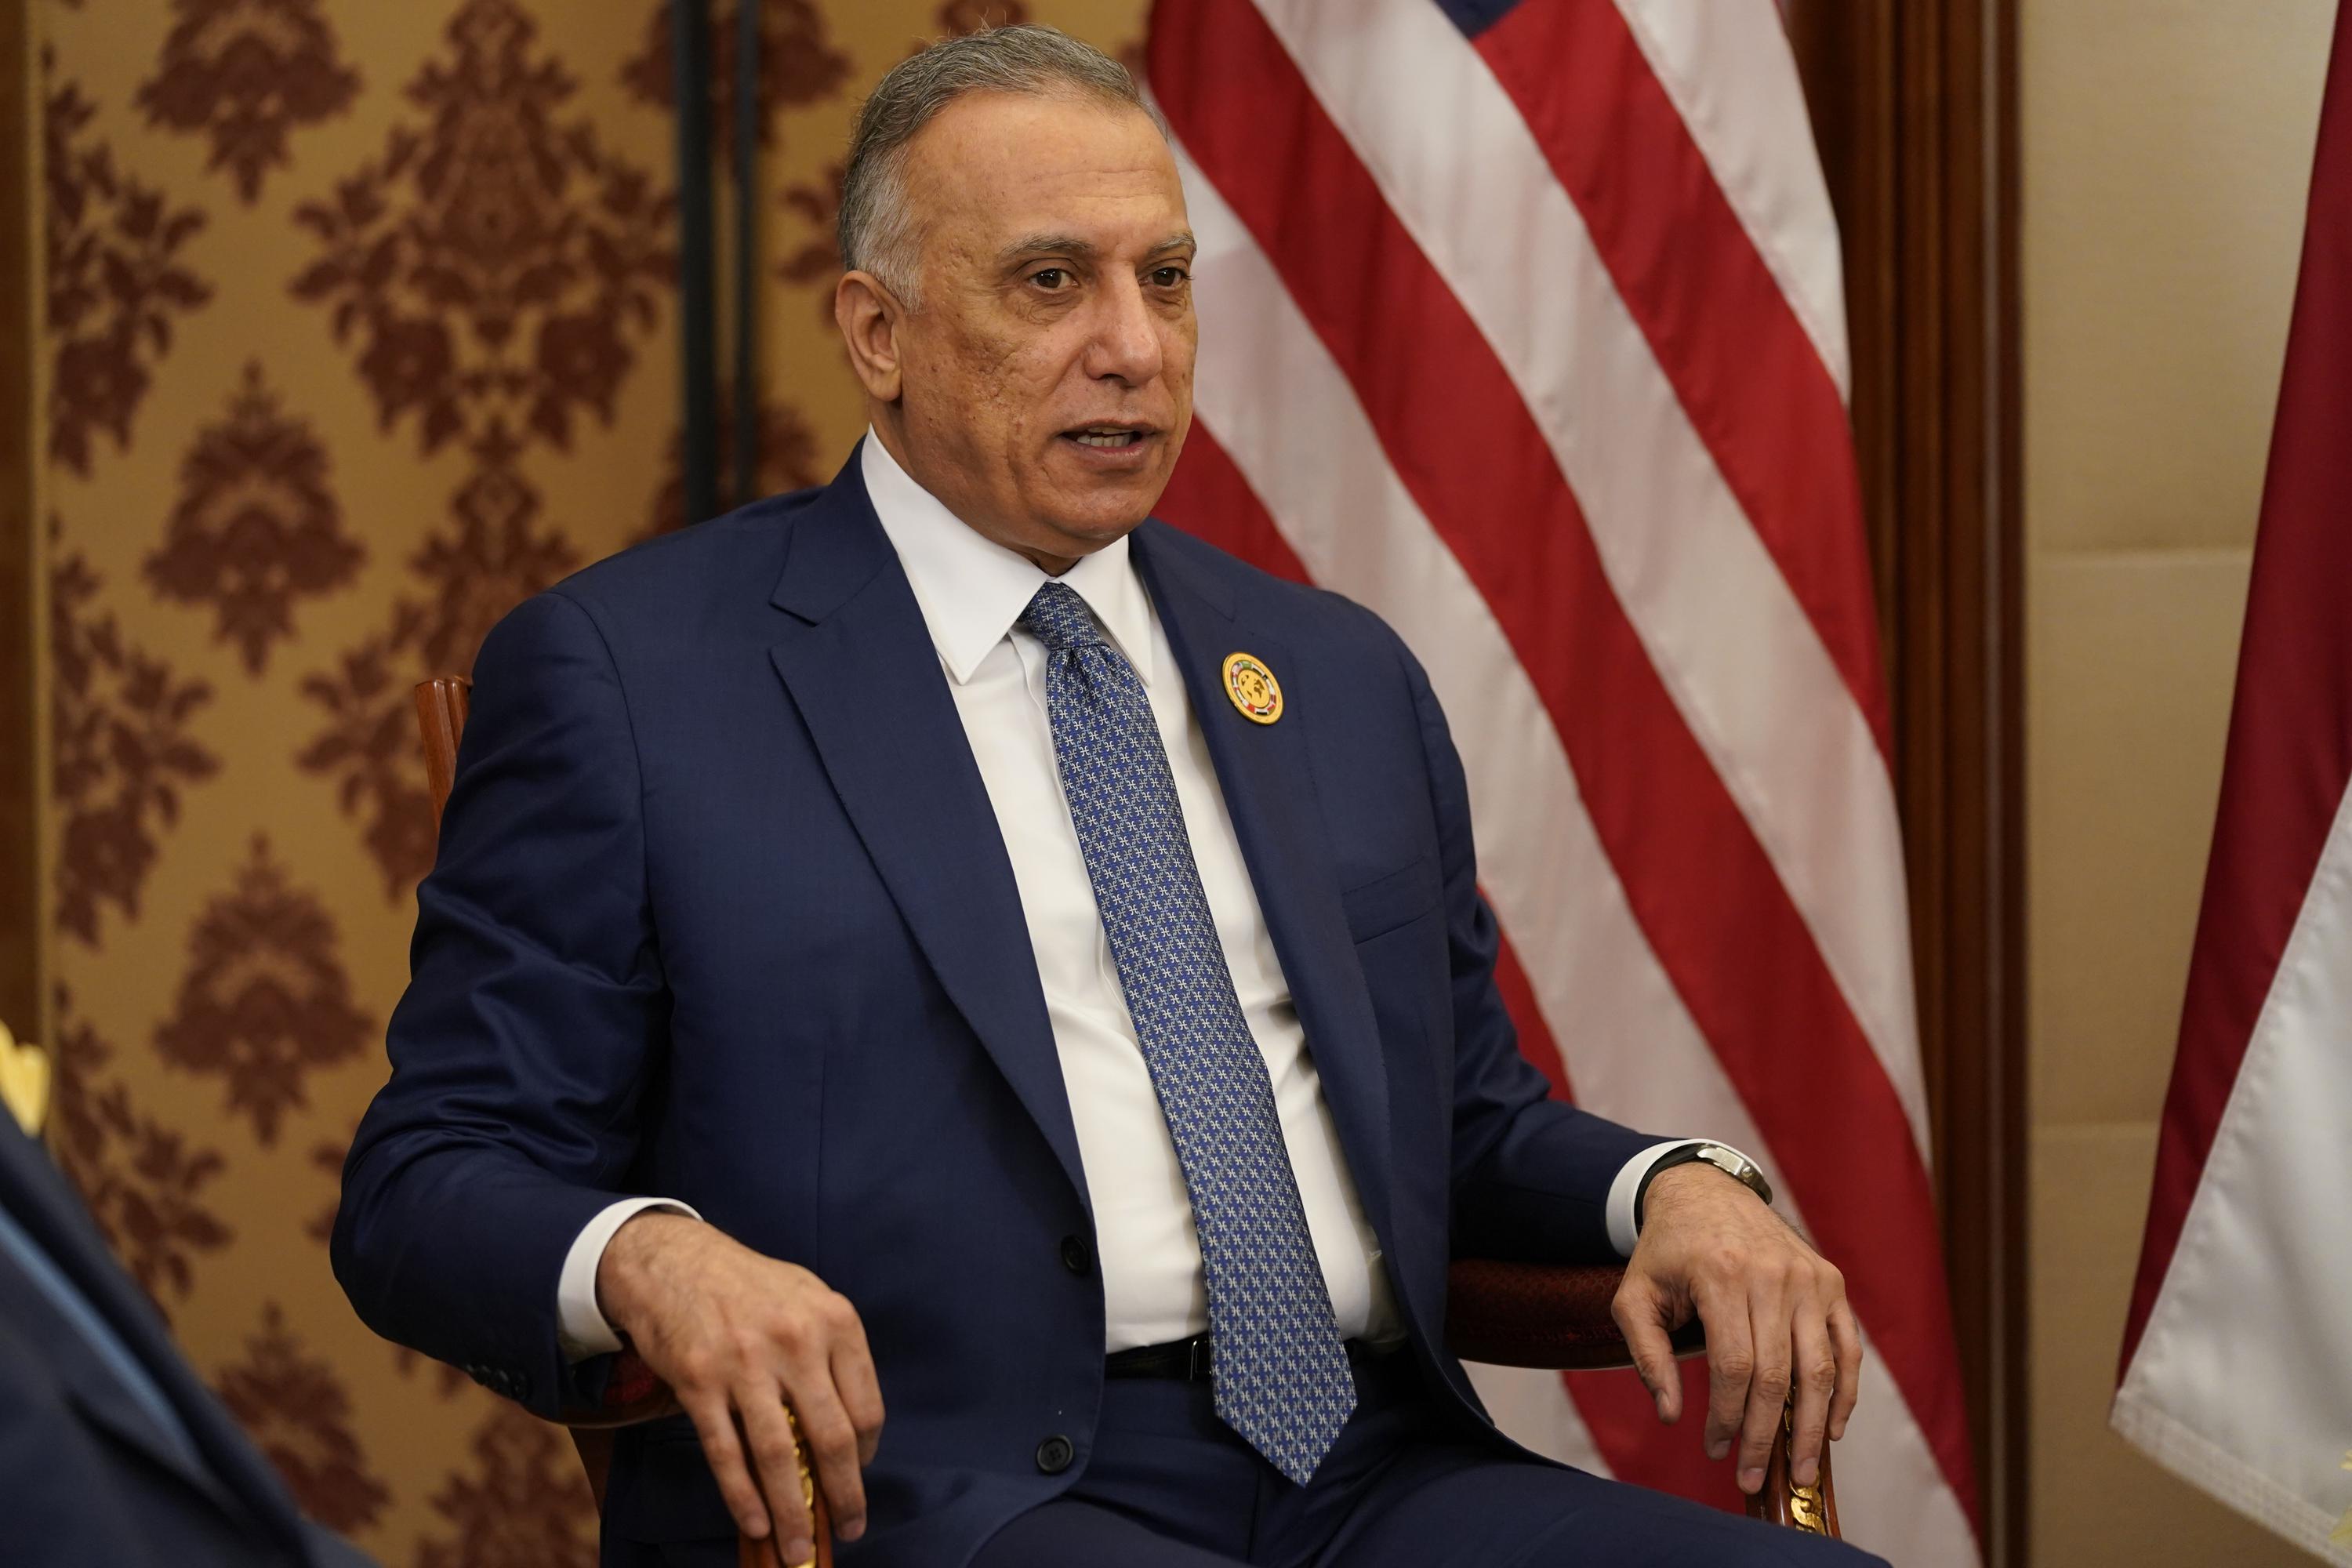 Iraq's PM to push for regional dialogue at Mideast summit